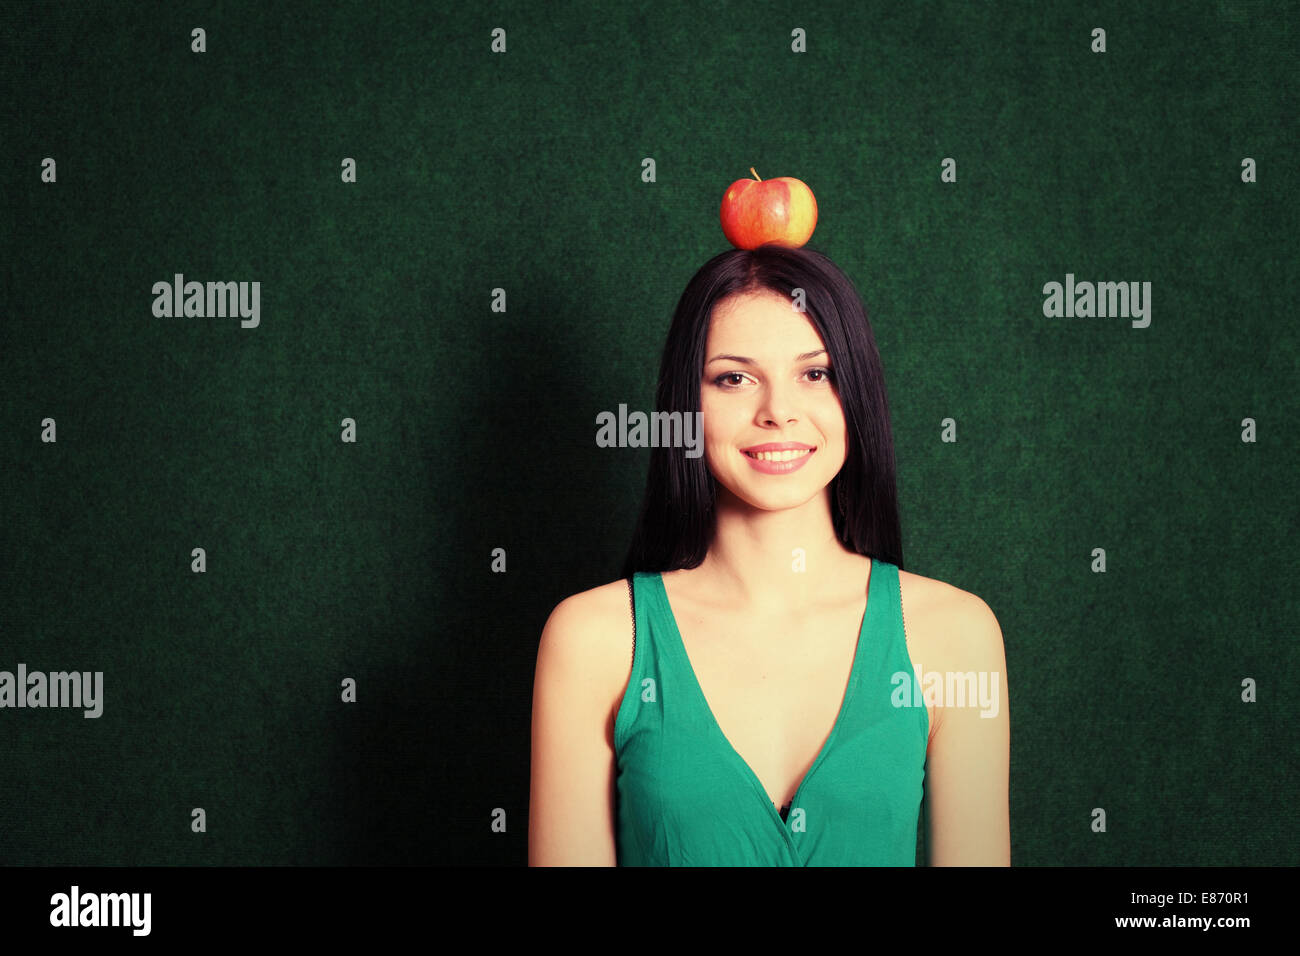 front view of the young female with an apple on her head and a lot of copyspace Stock Photo